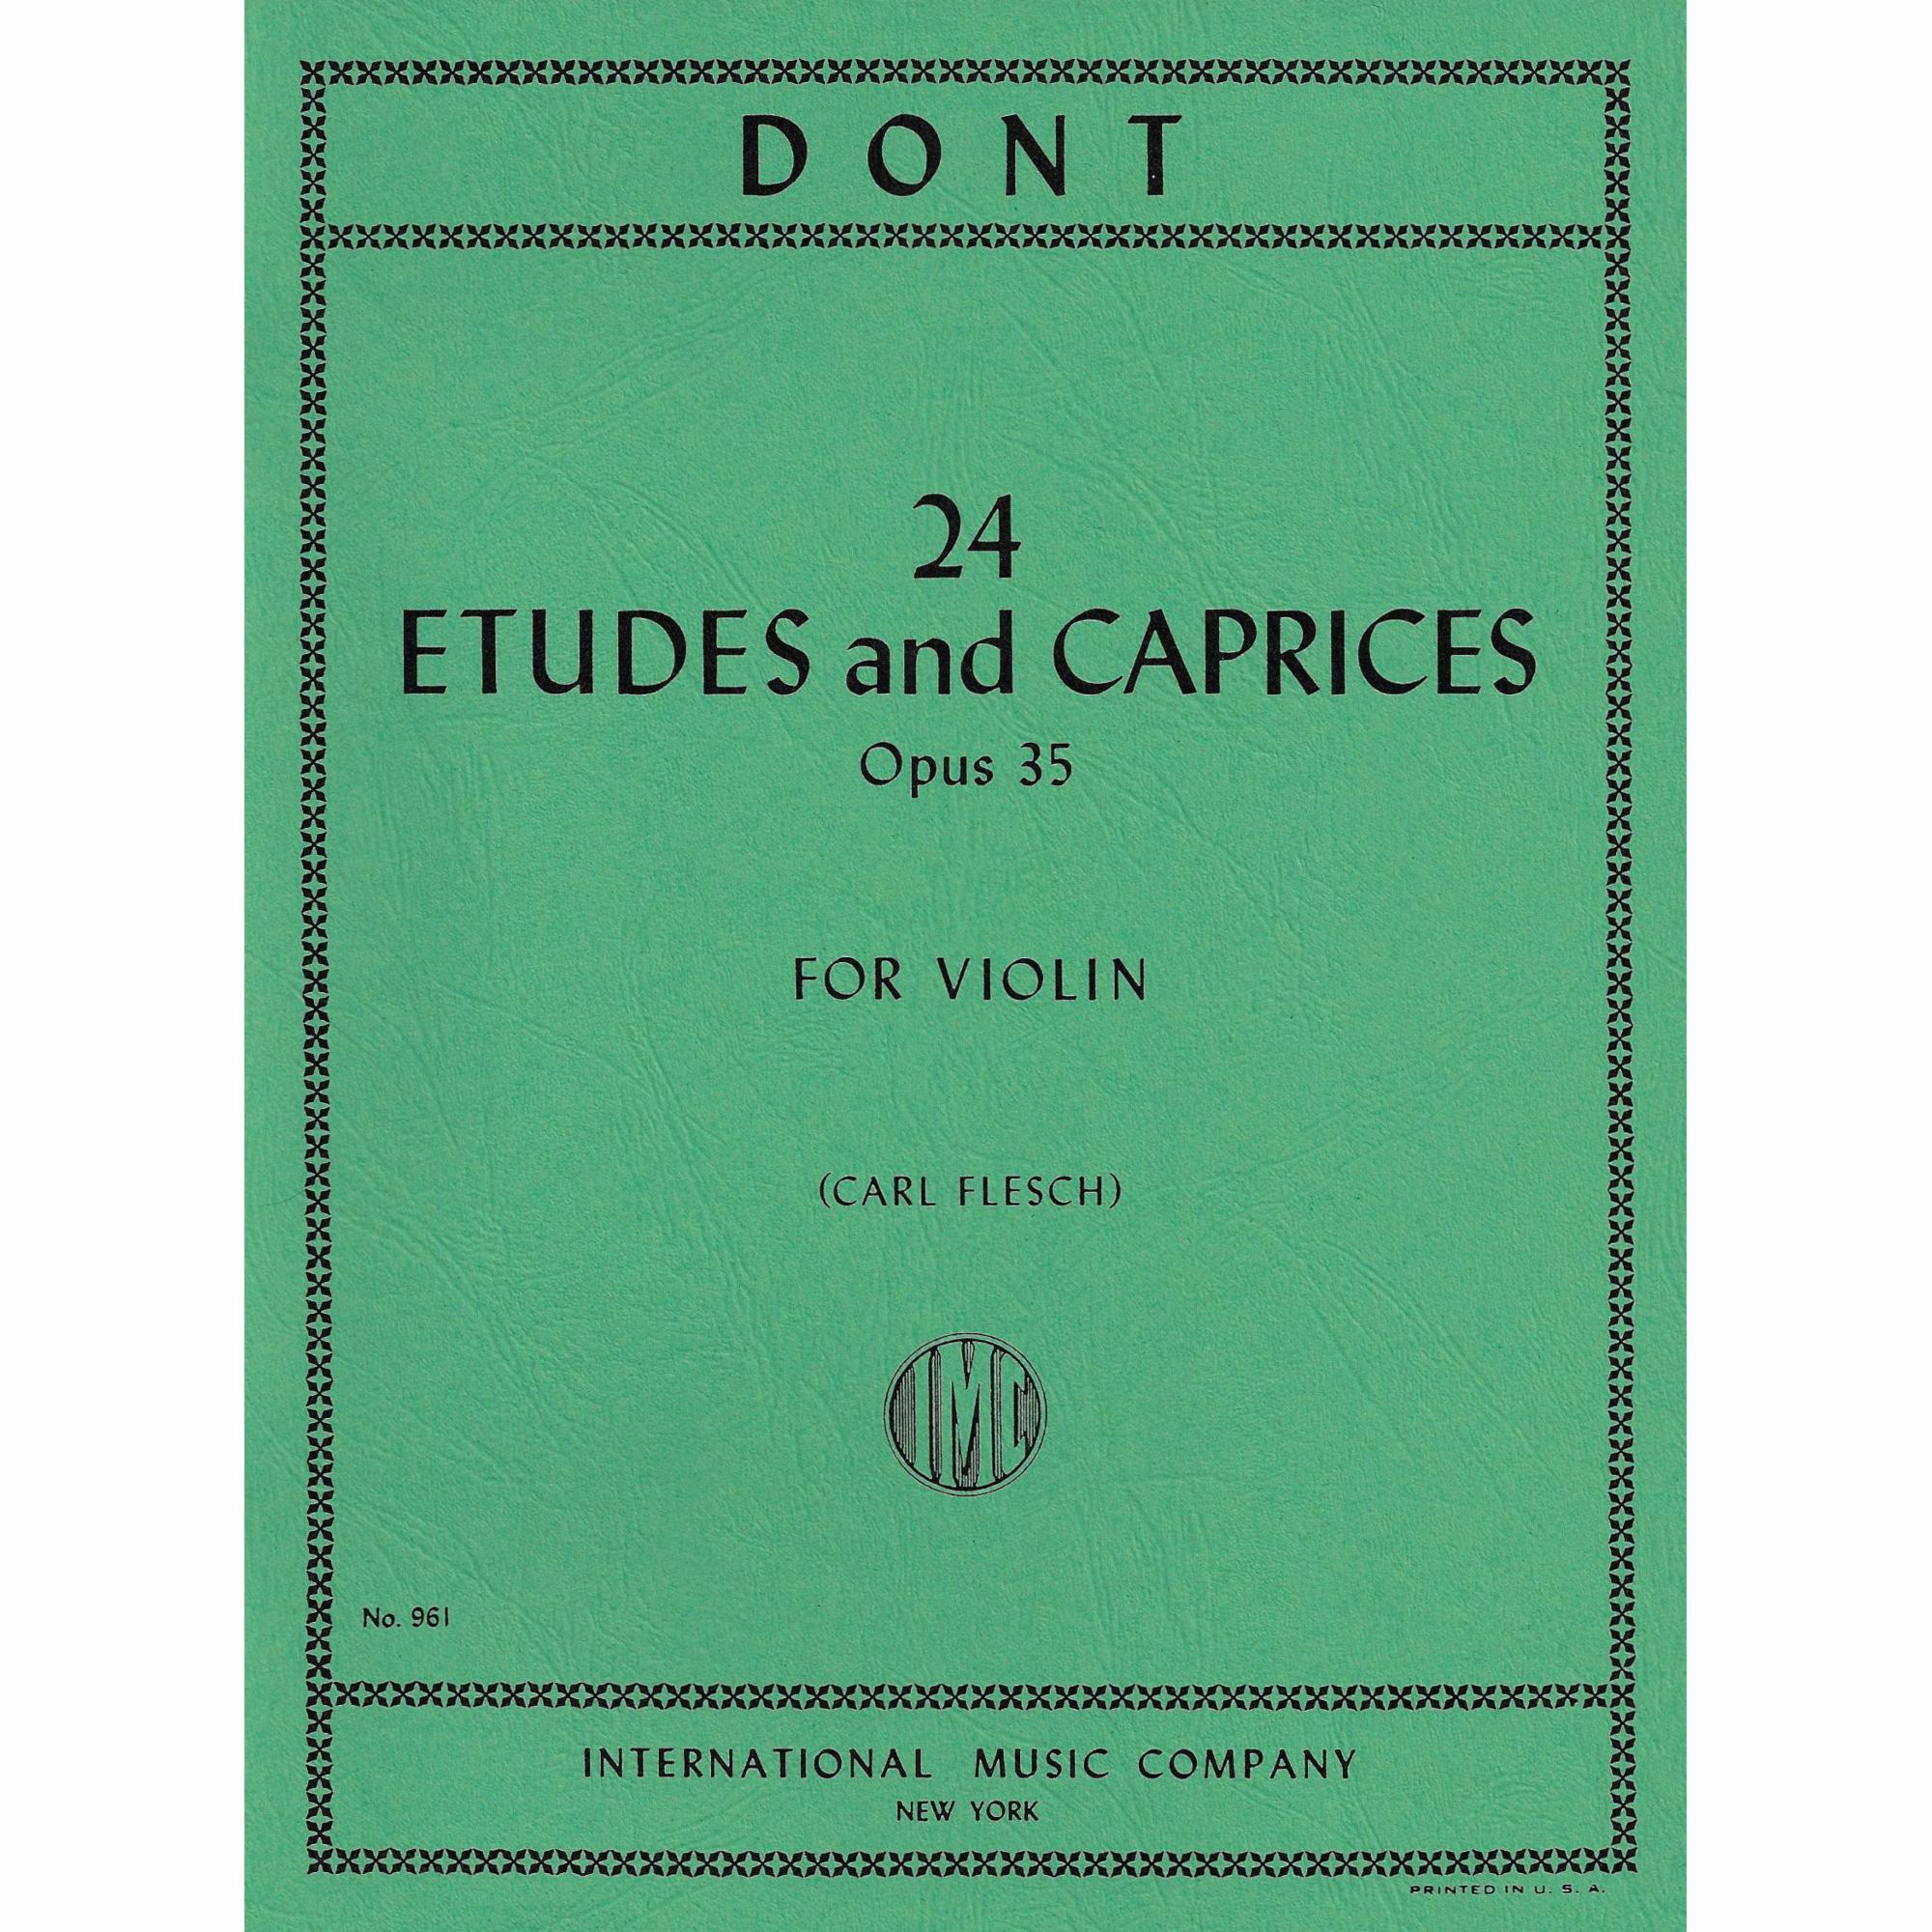 Dont -- 24 Etudes and Caprices, Op. 35 for Violin